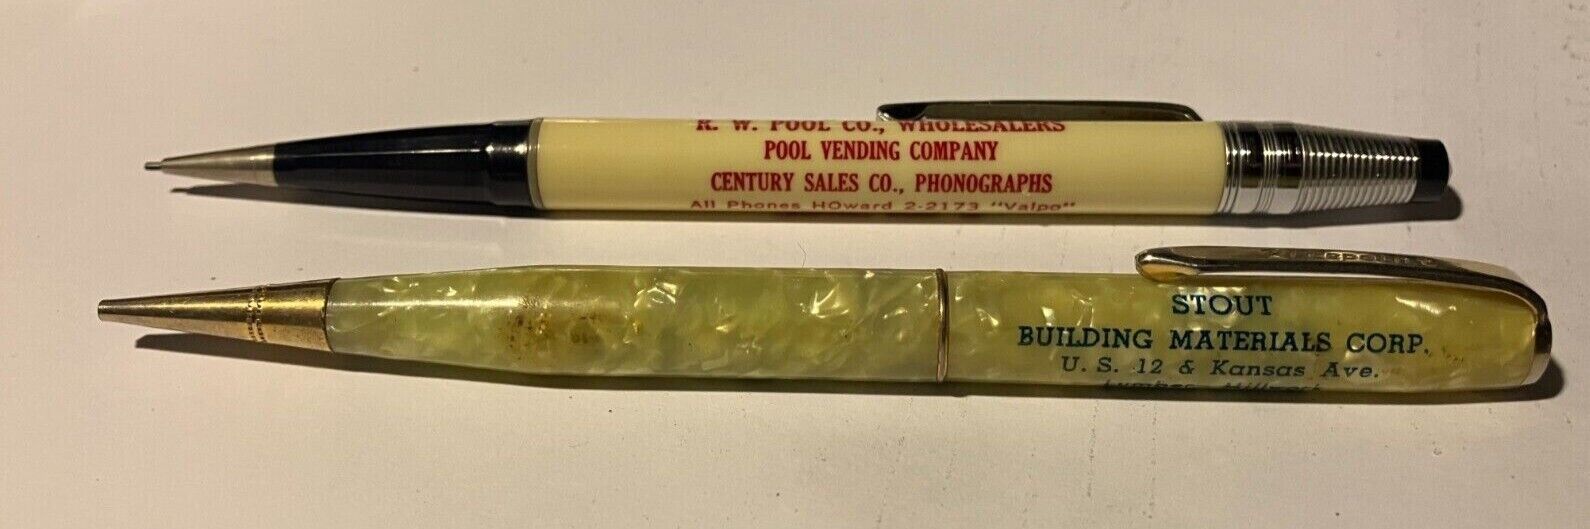 Two vintage advertising. mech. pencils: Stout and R. W. Pool: both perfect: $20.